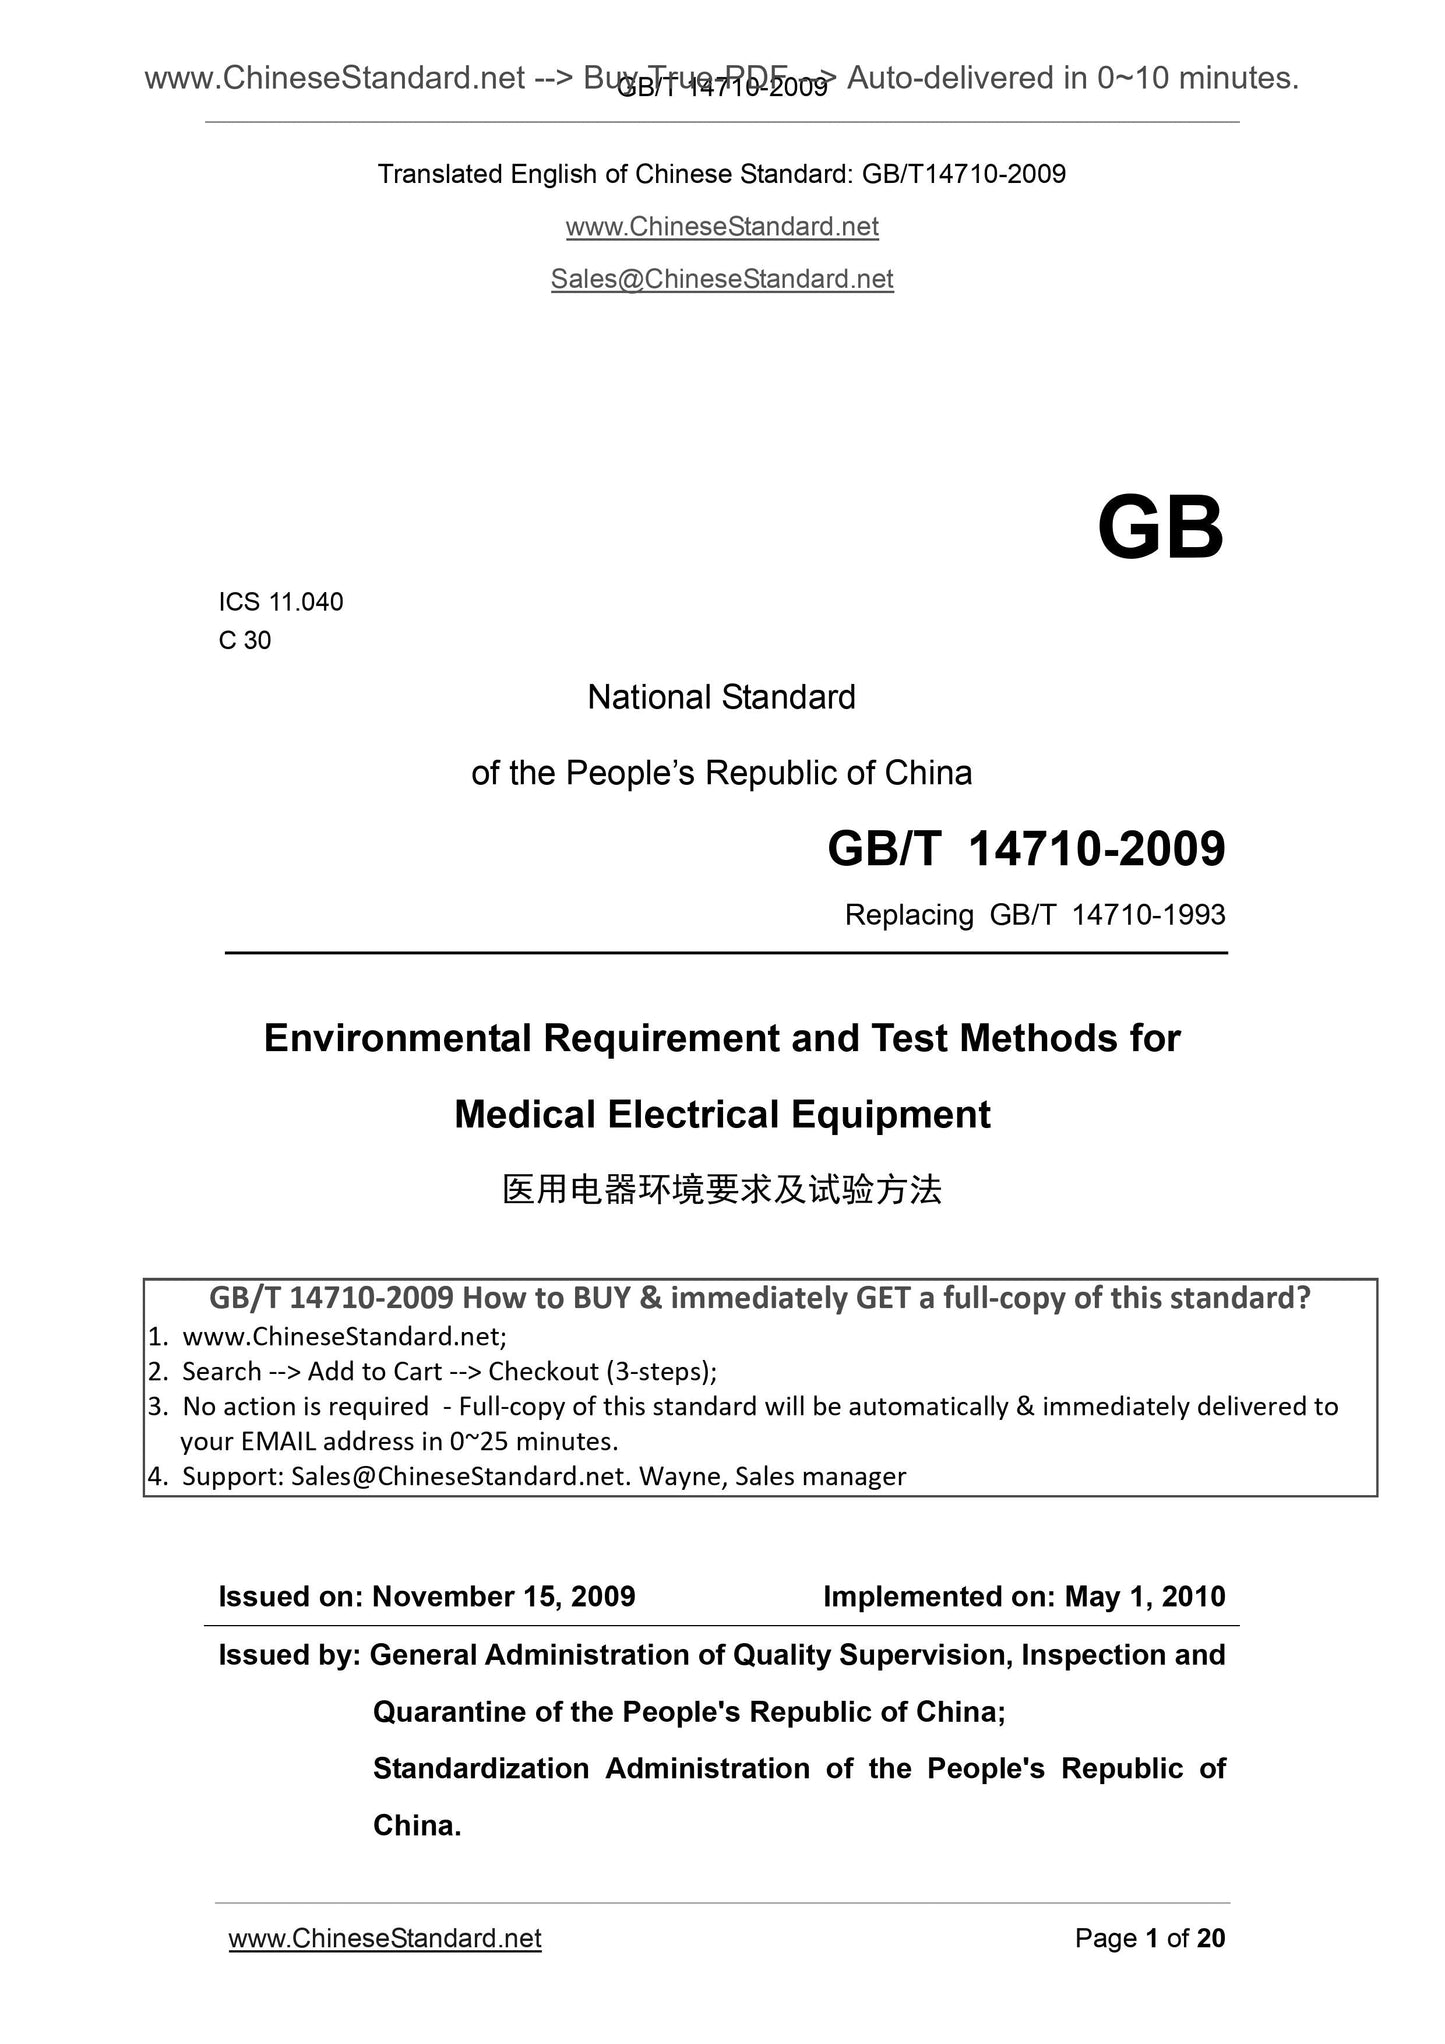 GB/T 14710-2009 Page 1